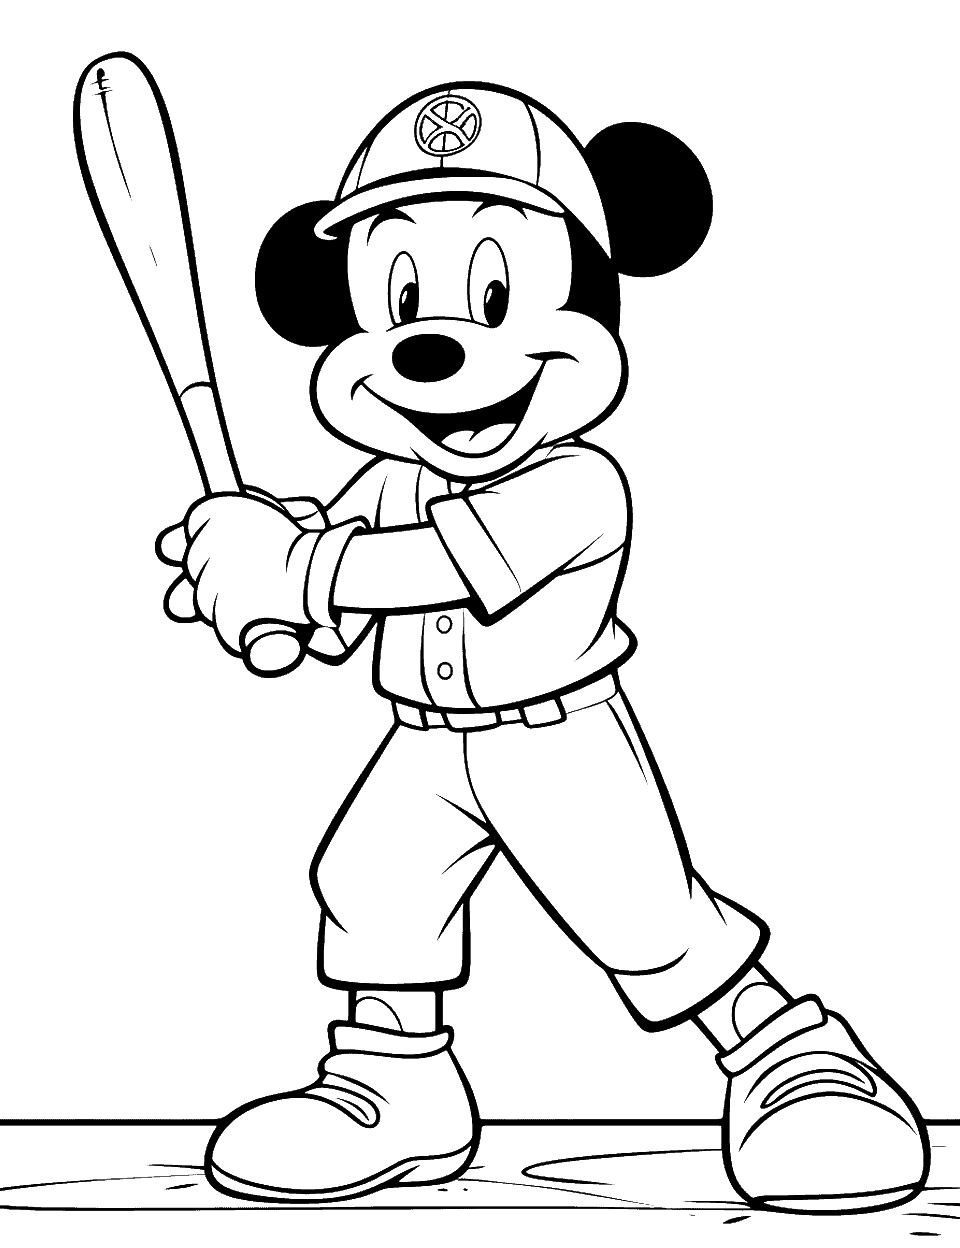 Mickey Playing Baseball Coloring Page - Mickey Mouse in a baseball uniform, swinging a bat with a happy expression.